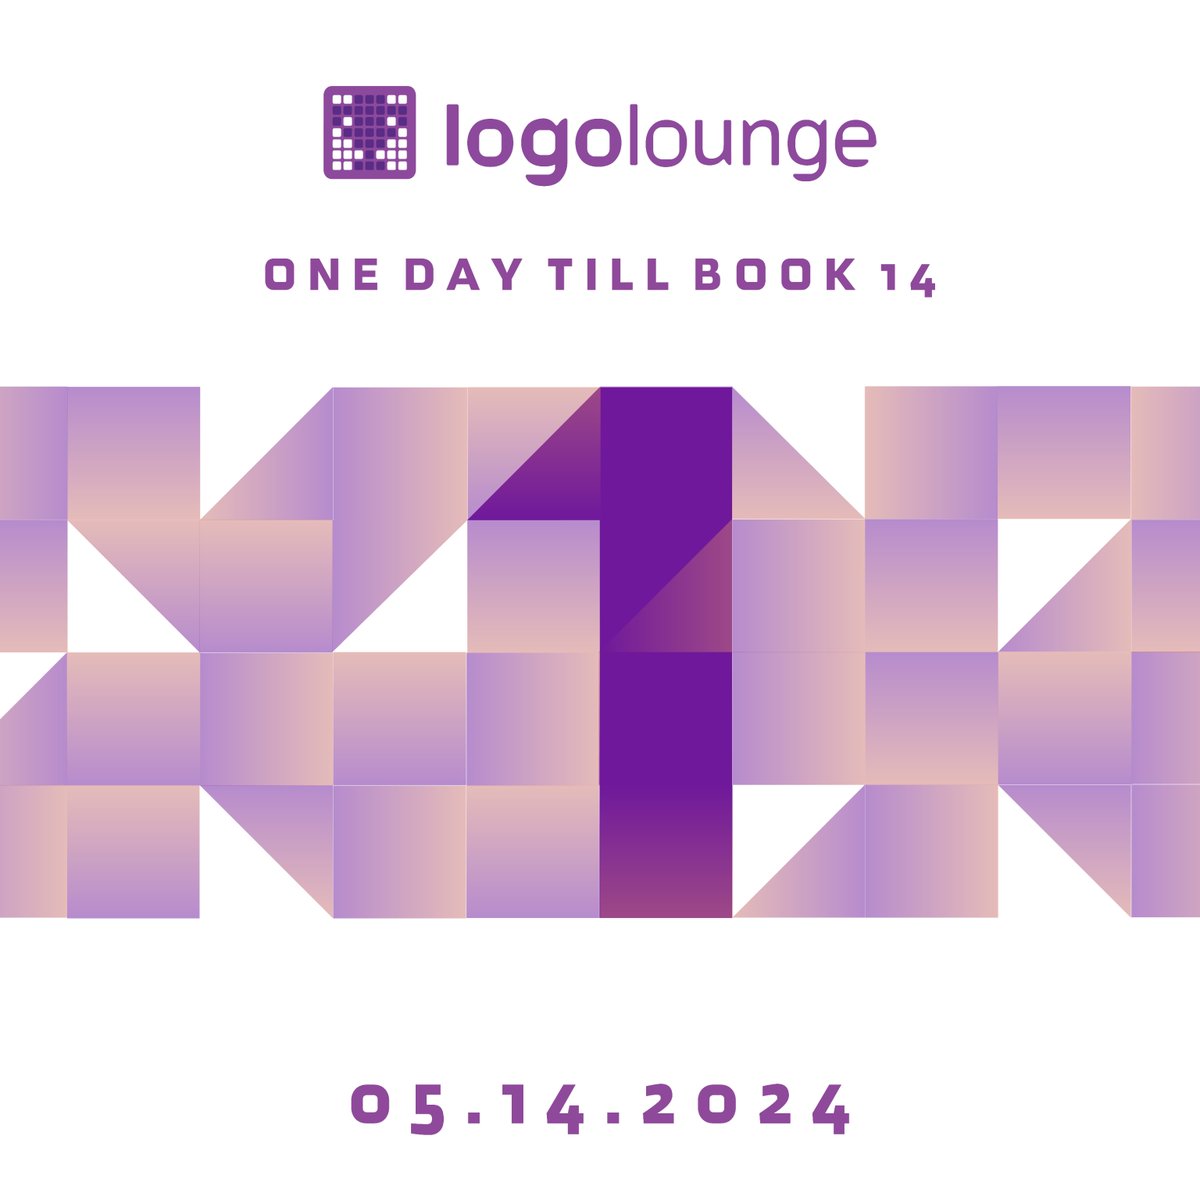 Tomorrow is the big day! Book 14 will be for purchase on Amazon and Bookbaby! 05.14.2024 #Book14 #logo #logolounge #logoloungebook14